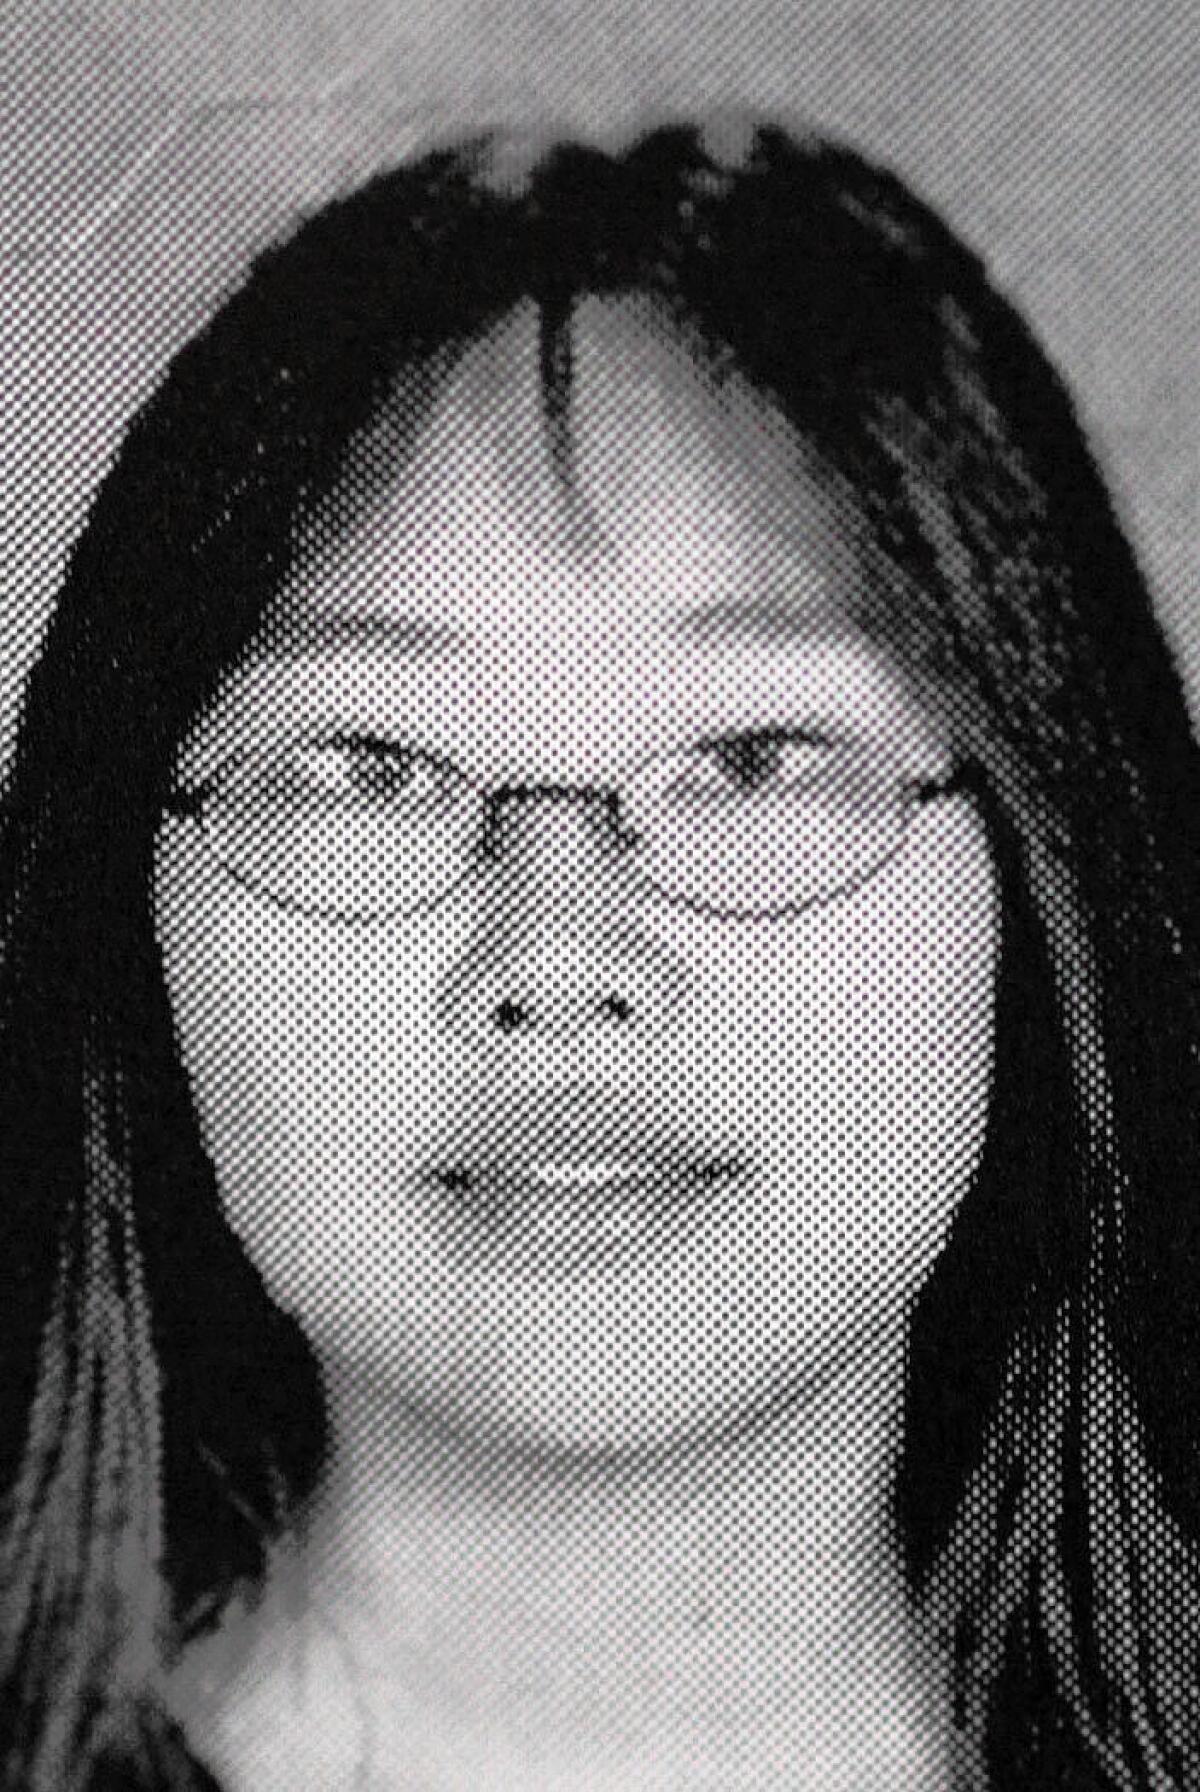 Caitlin Oto, shown in a 2004 yearbook photo from El Modena High School.